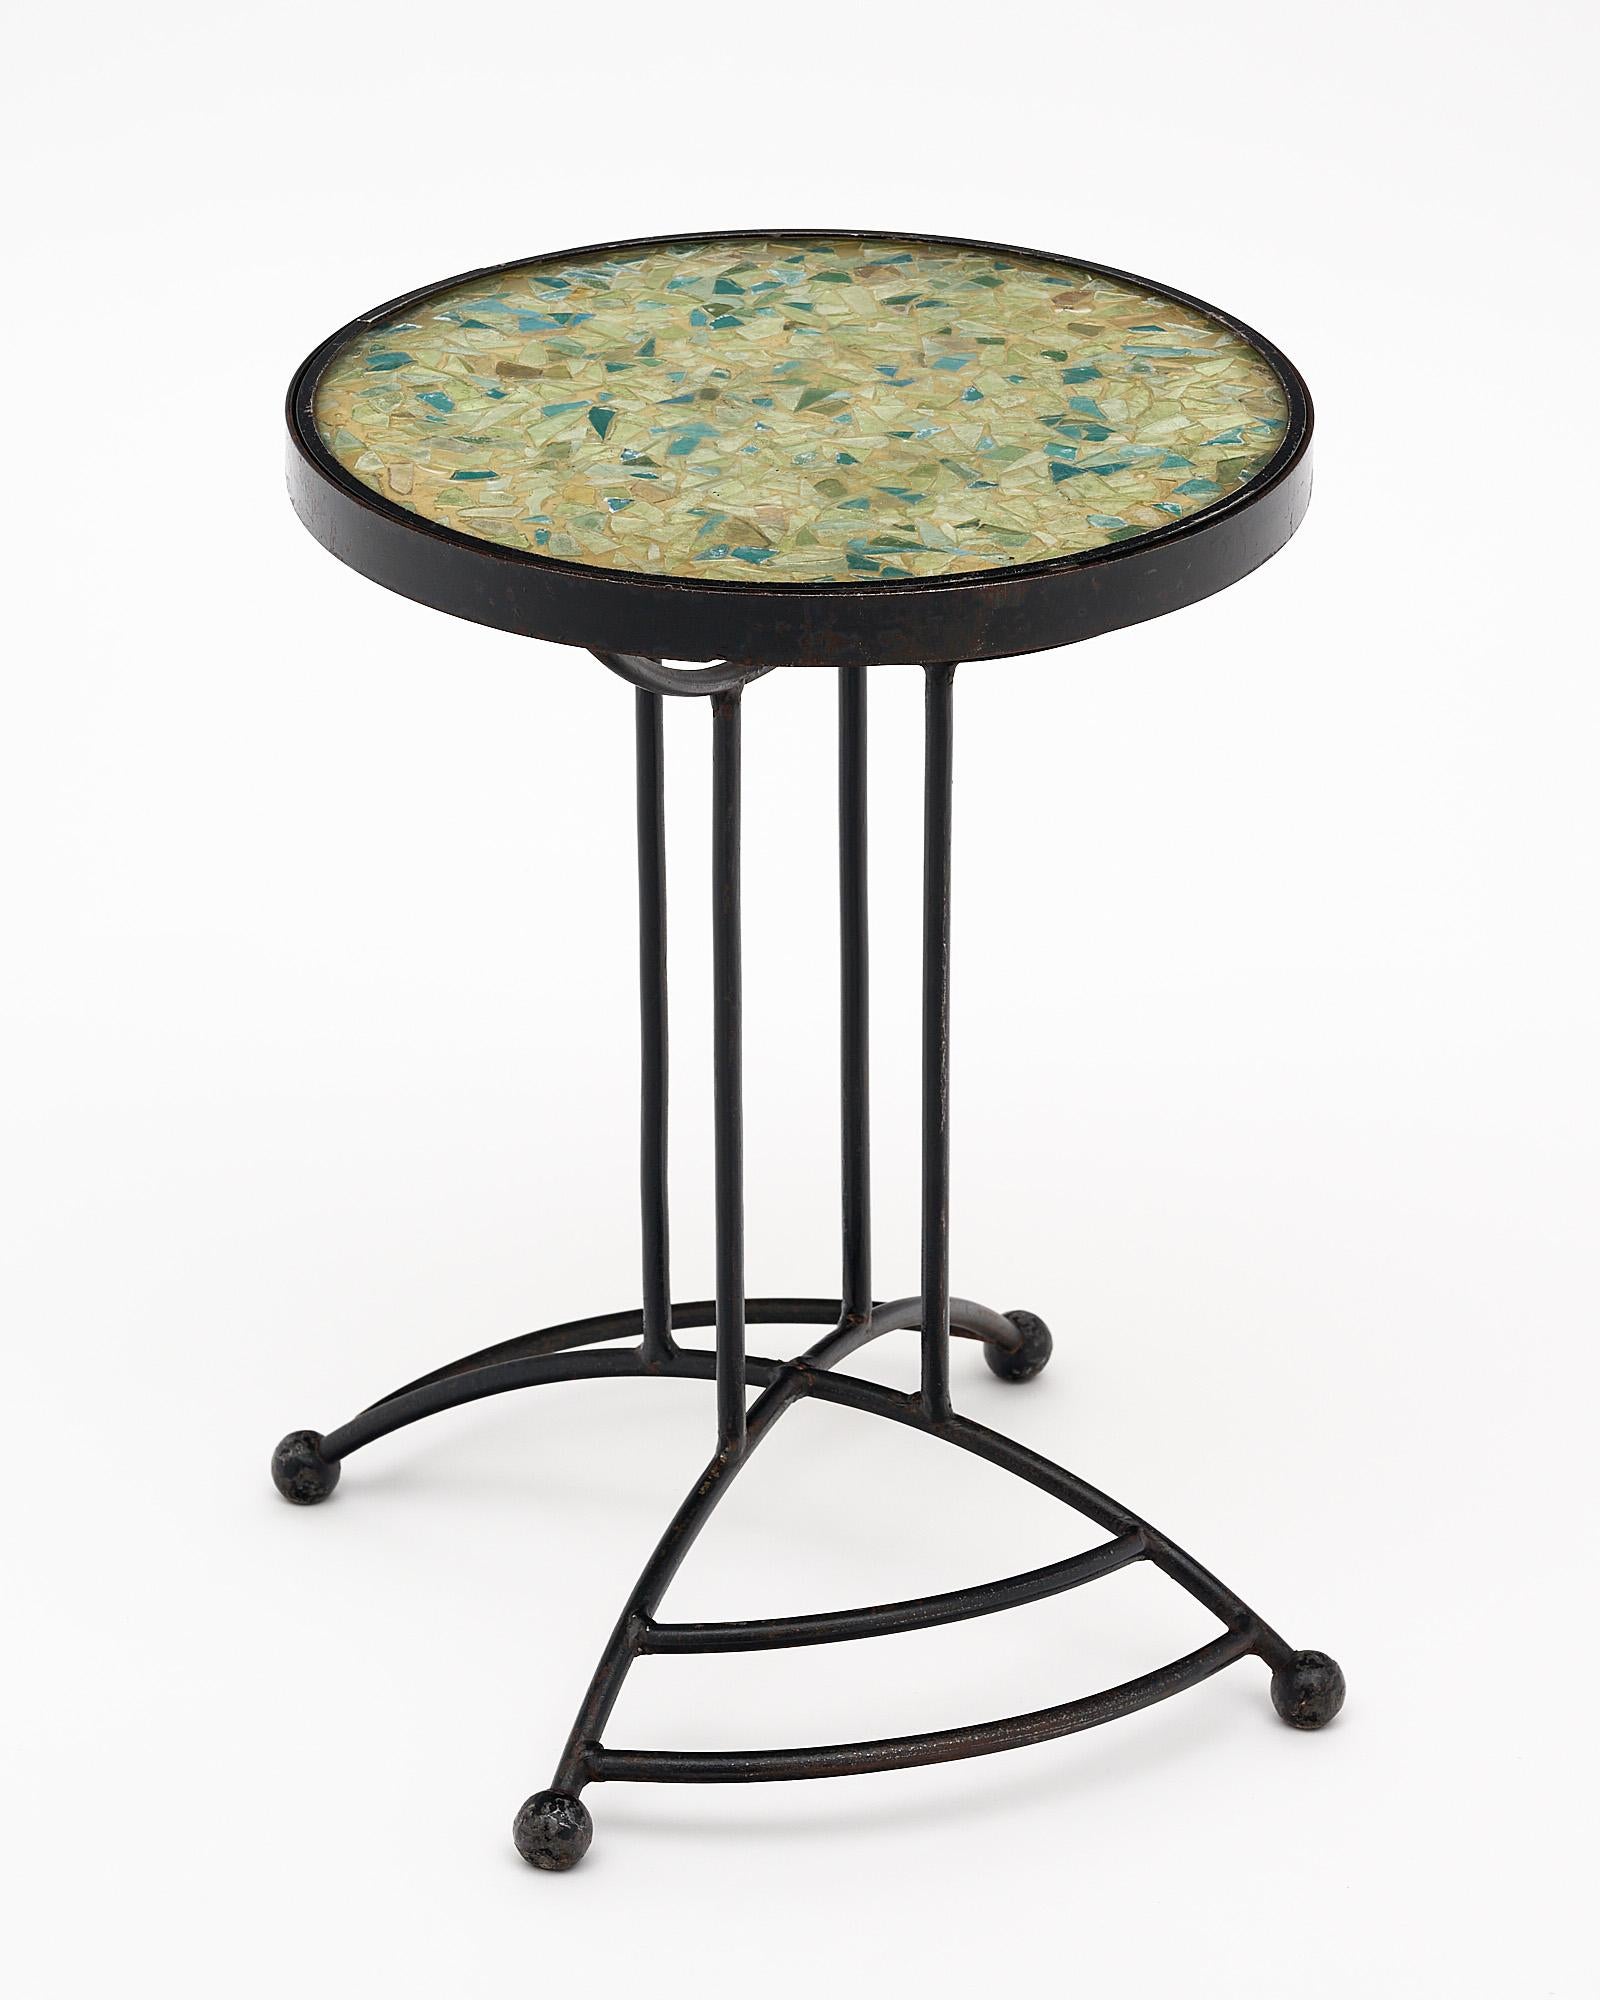 Side table, French, from Vallauris on the French Riviera. This modernist intricate black lacquered iron base supports a spheric top featuring an original polychrome glass mosaic work.